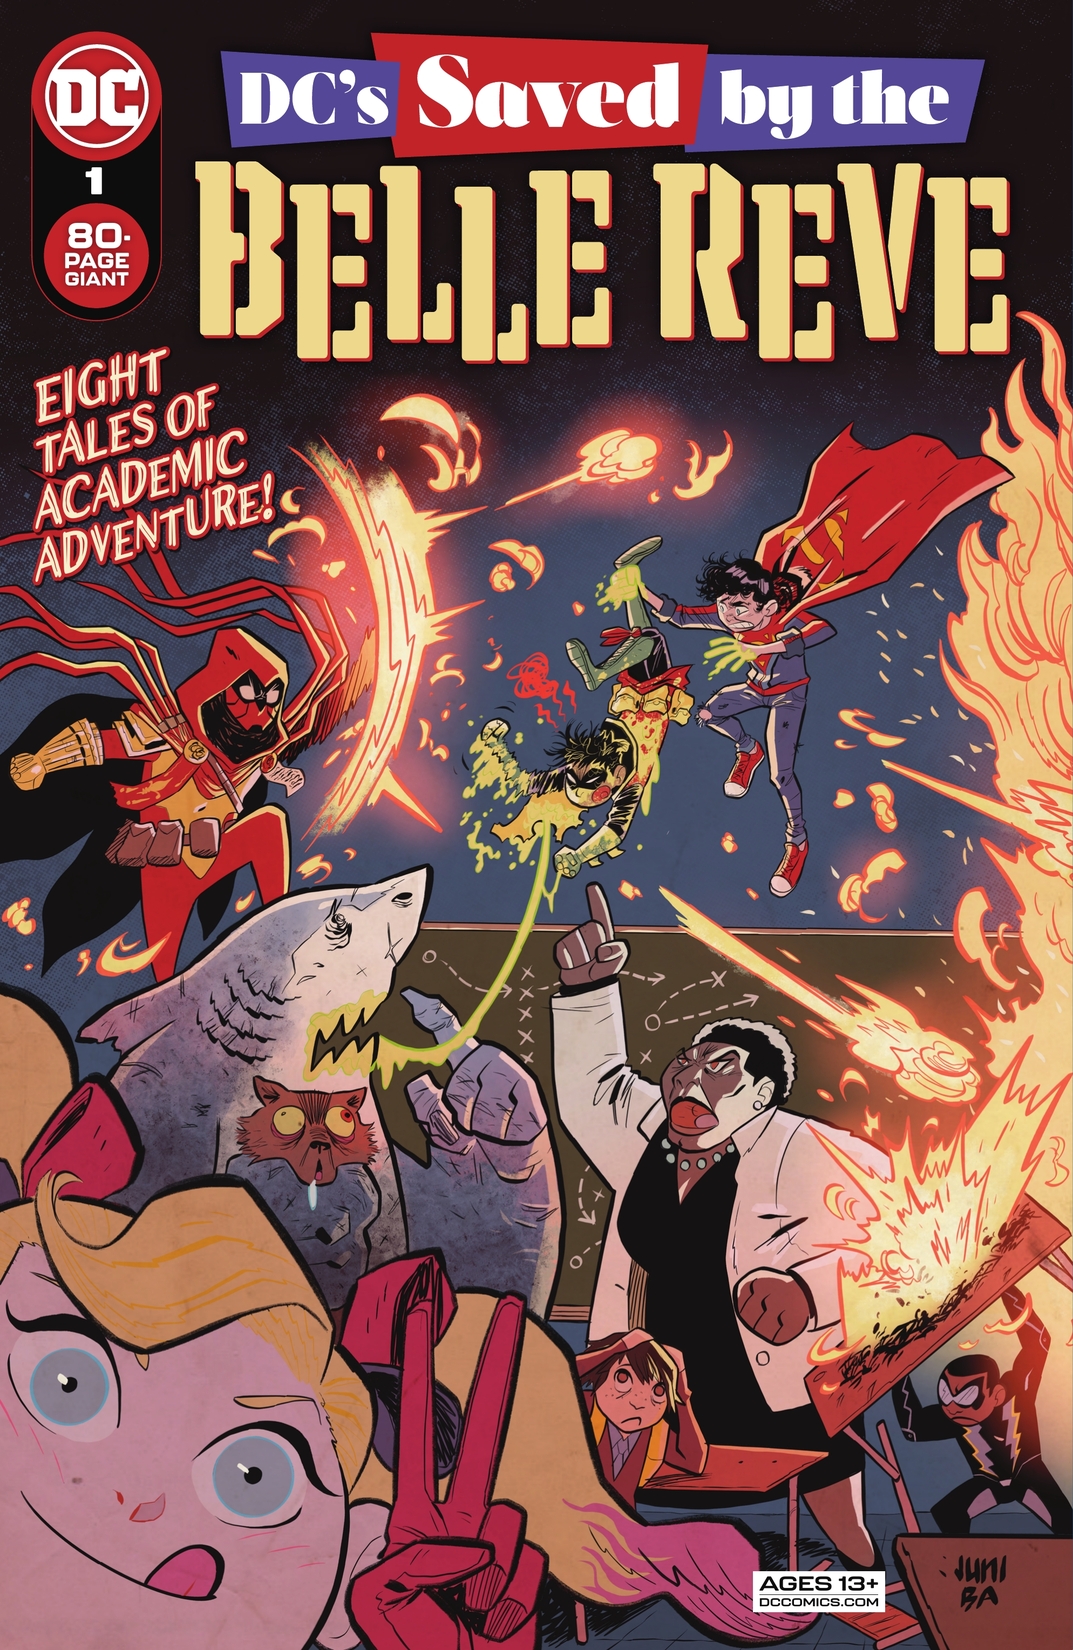 DC's Saved by the Belle Reve #1 preview images